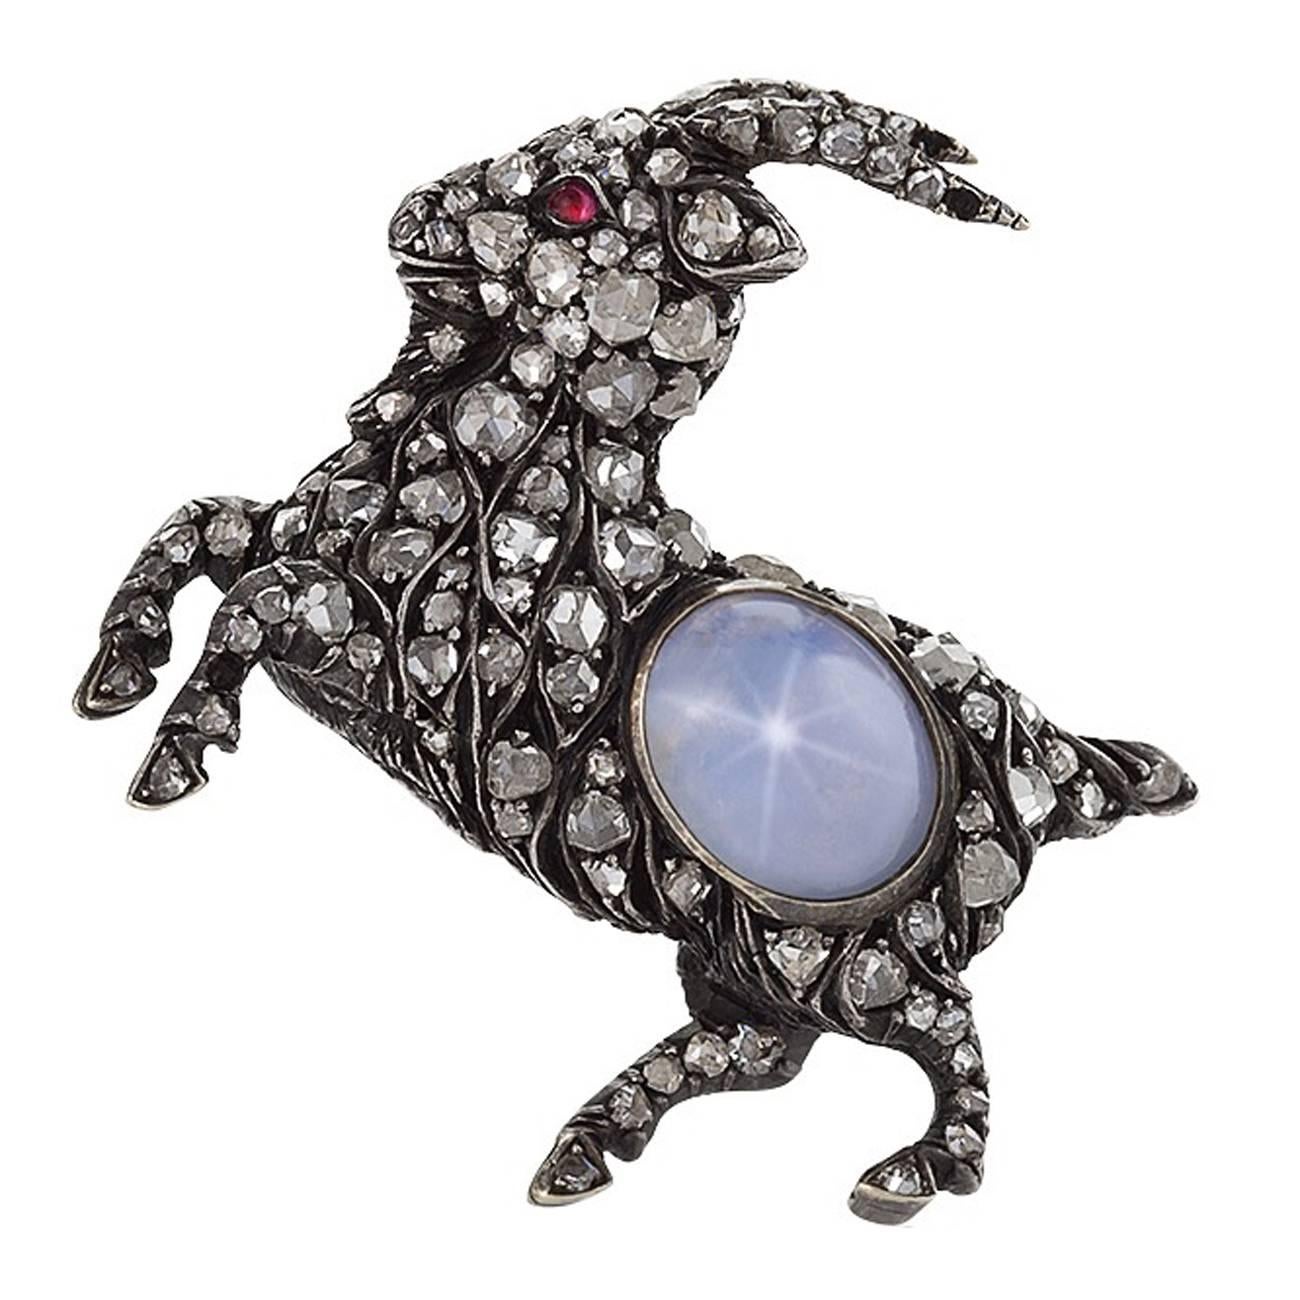 Antique English Diamond Star Sapphire Silver Topped Gold Billy Goat Brooch